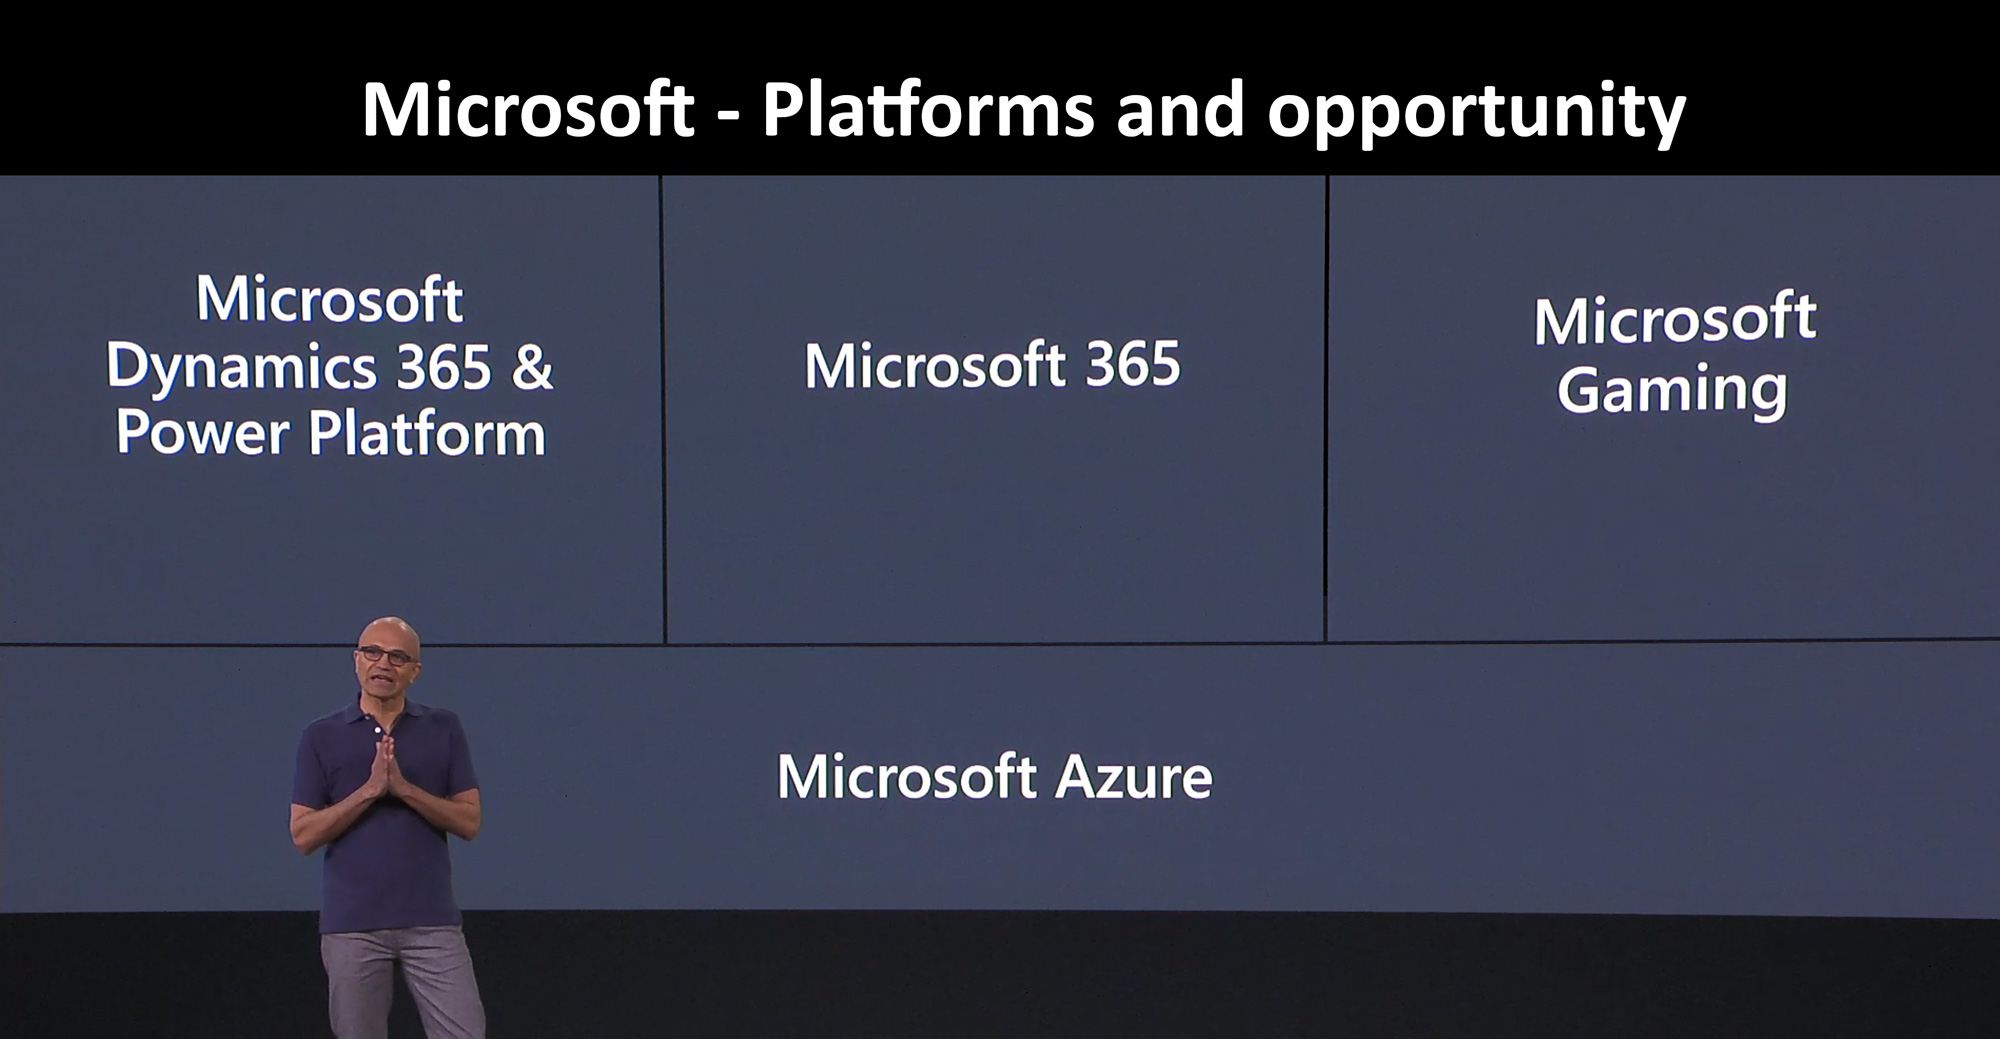 Microsoft - Platforms and opportunity as presented by Satya Nadella at Build 2019